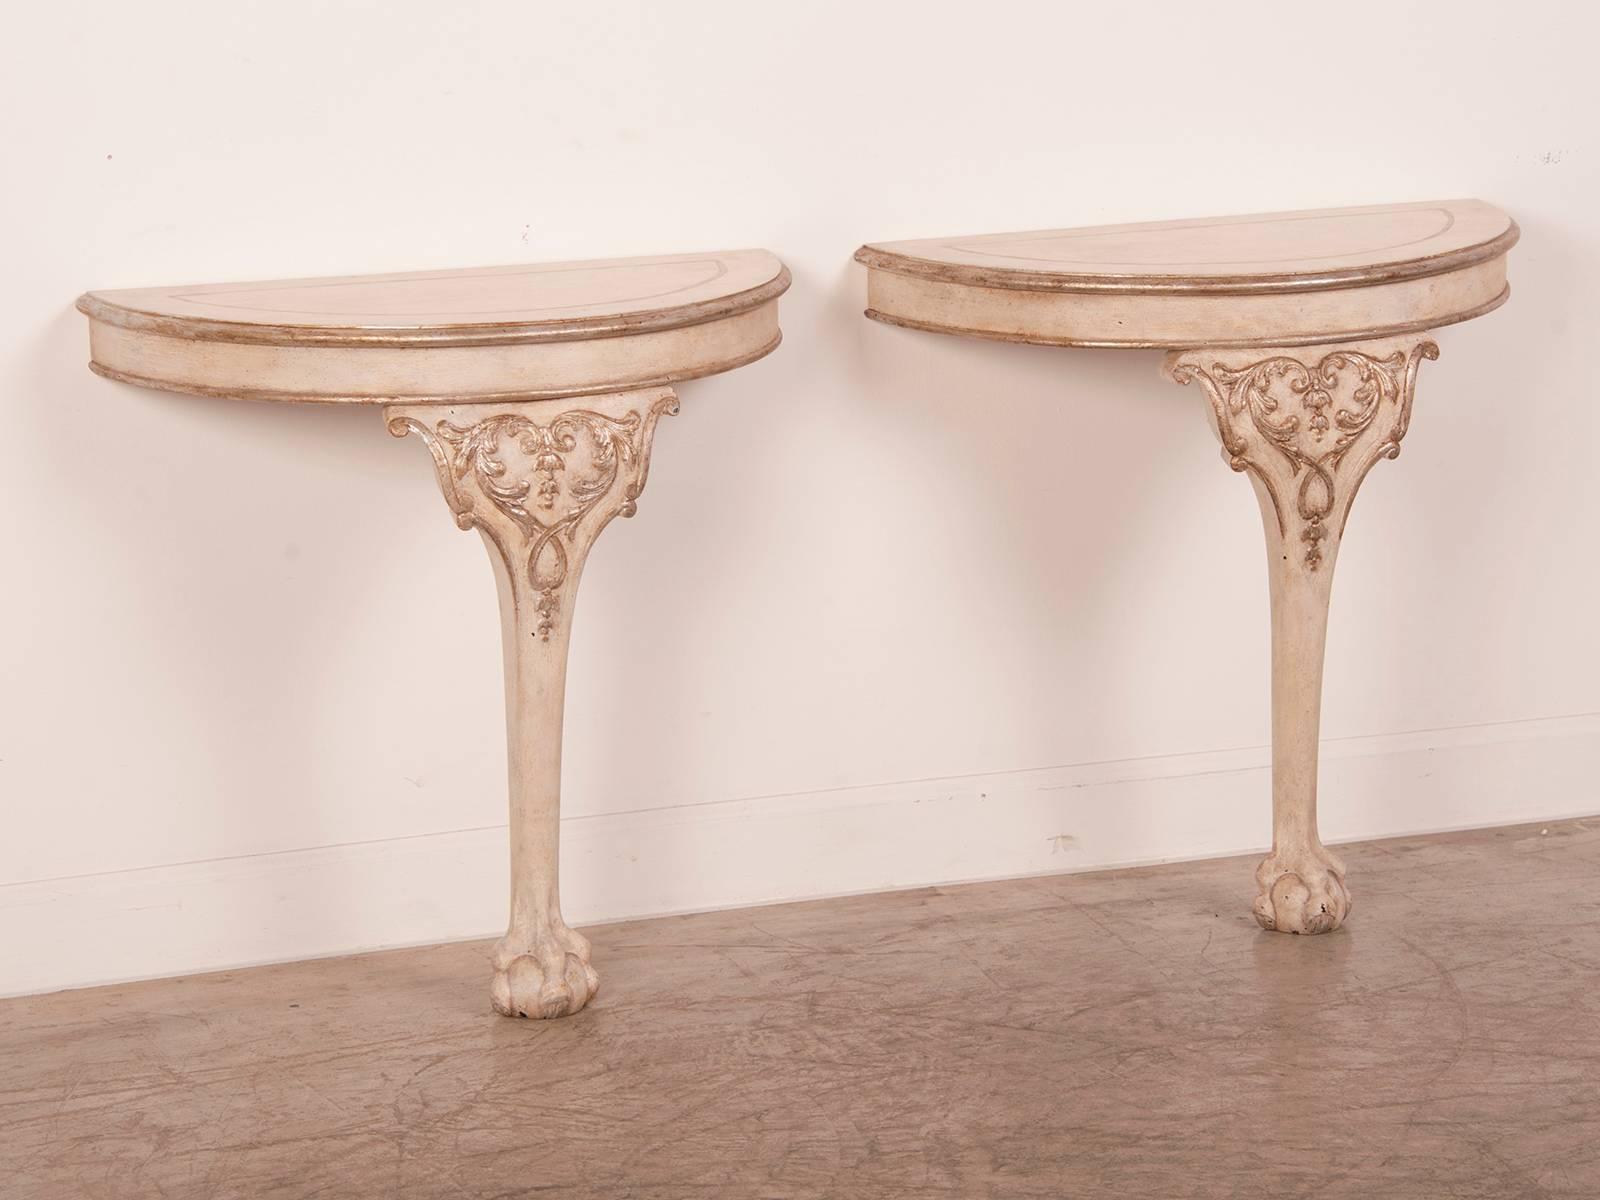 Receive our new selections direct from 1stdibs by email each week. Please click Follow Dealer below and see them first!

A pair of Chippendale style single leg console tables each with a cabriole leg from England, circa 1895 now with a gorgeous